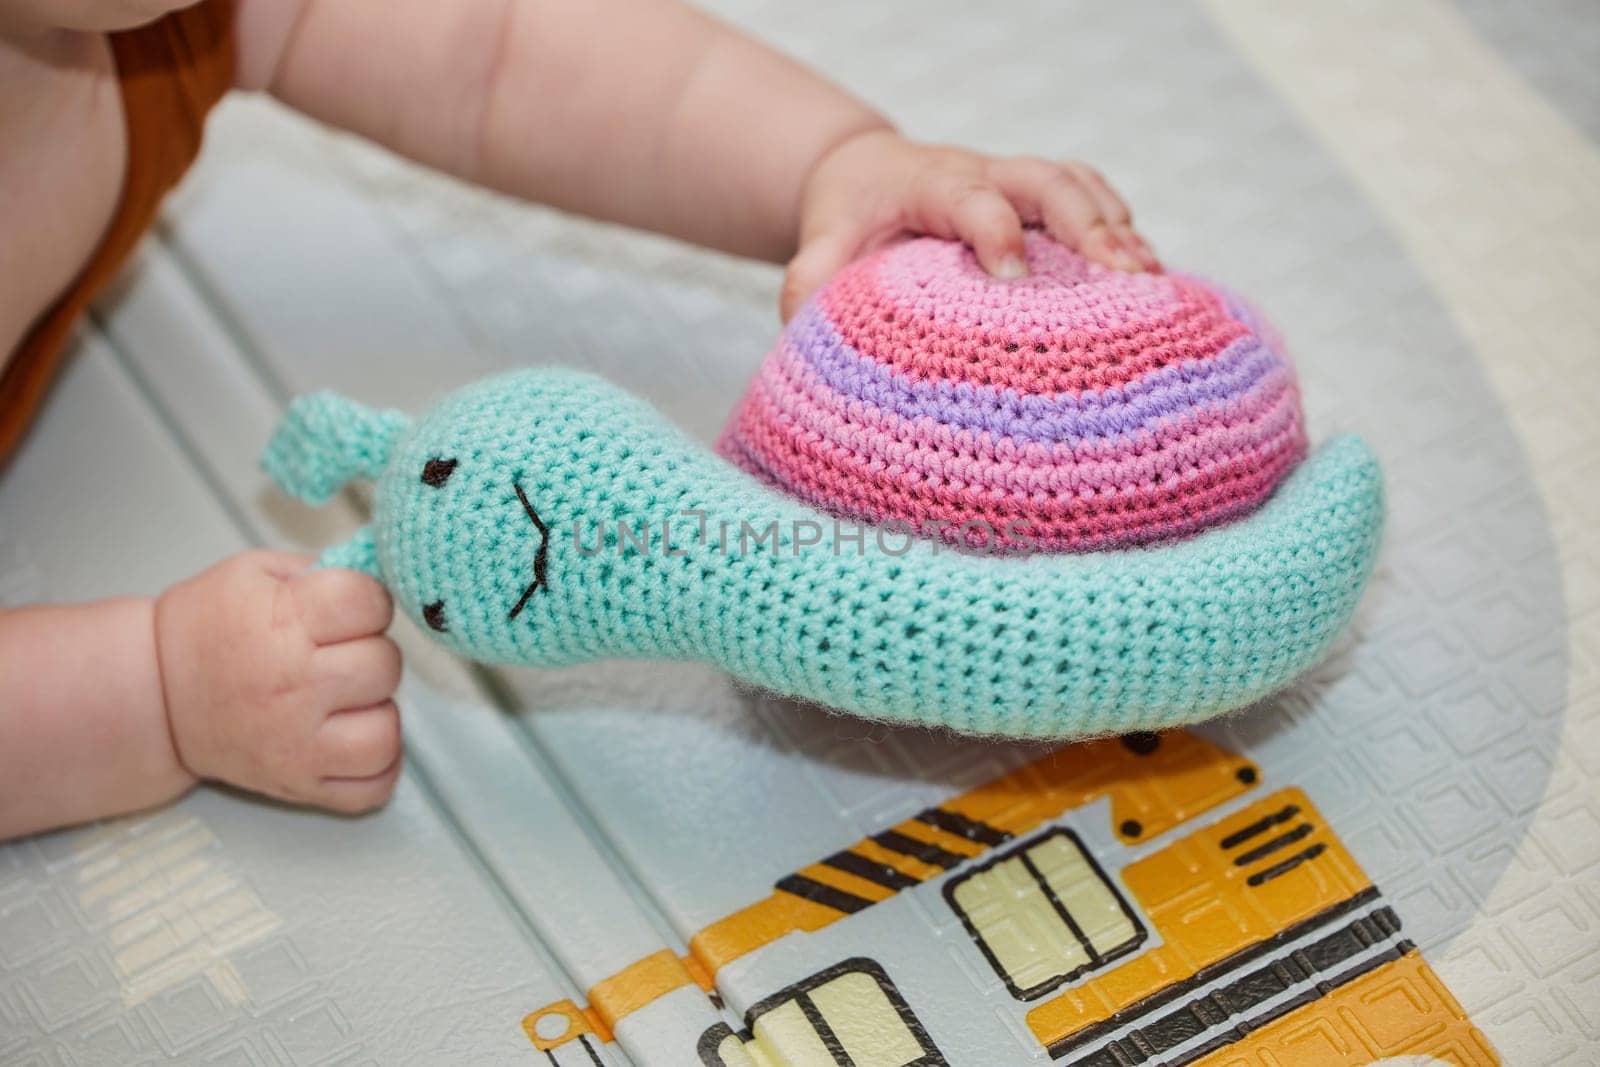 baby plays with a knitted toy in the nursery by Viktor_Osypenko